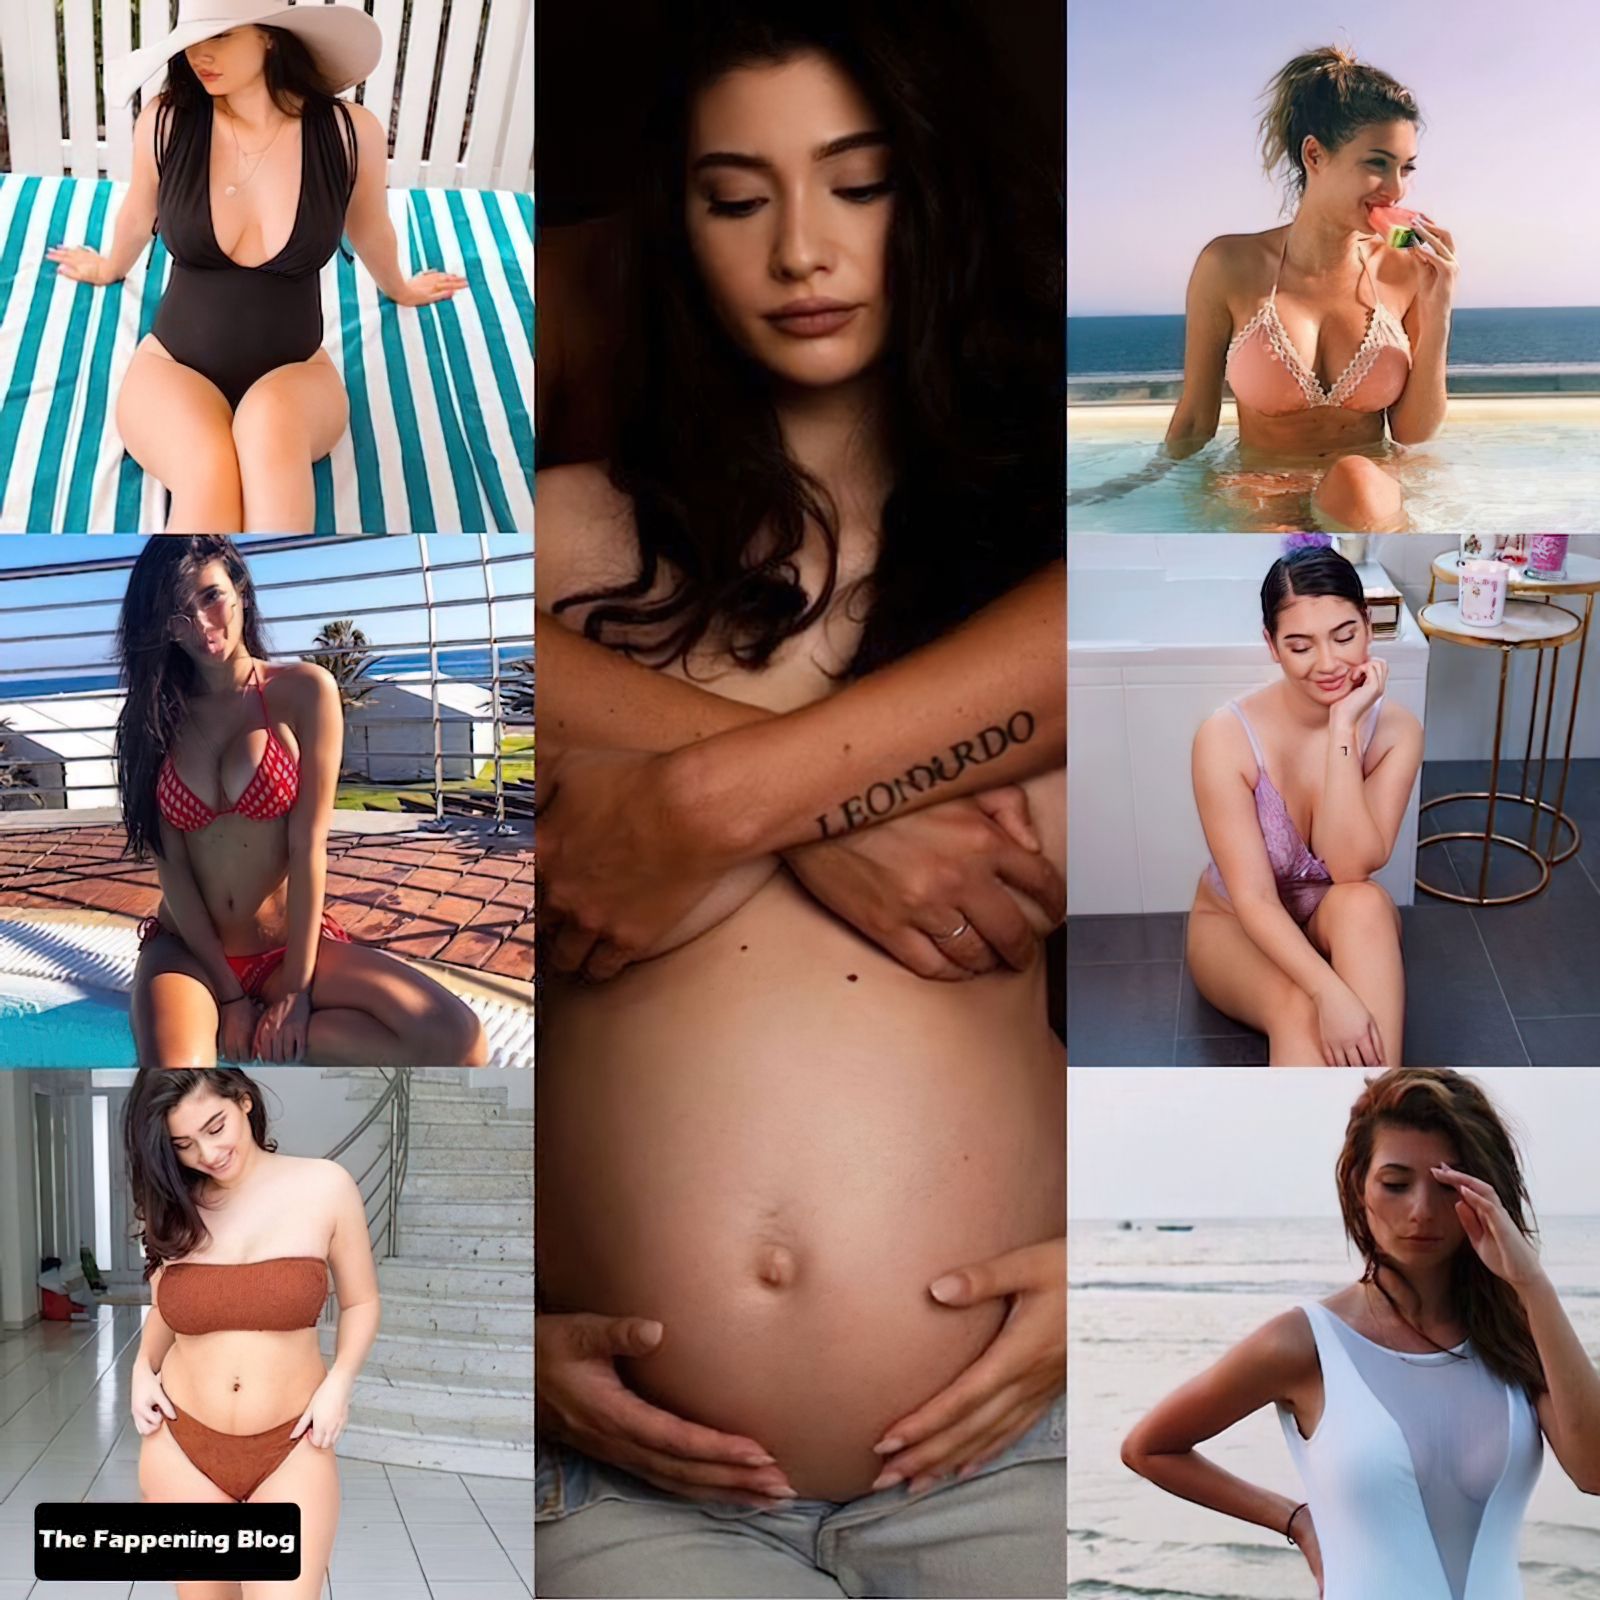 Paola-Maria-Koslowski-Nude-and-Sexy-Photo-Collection-including-her-socila-media-Instagram-topless-pregnant-bikini-pictures-1-thefappeningblog.com_.jpg